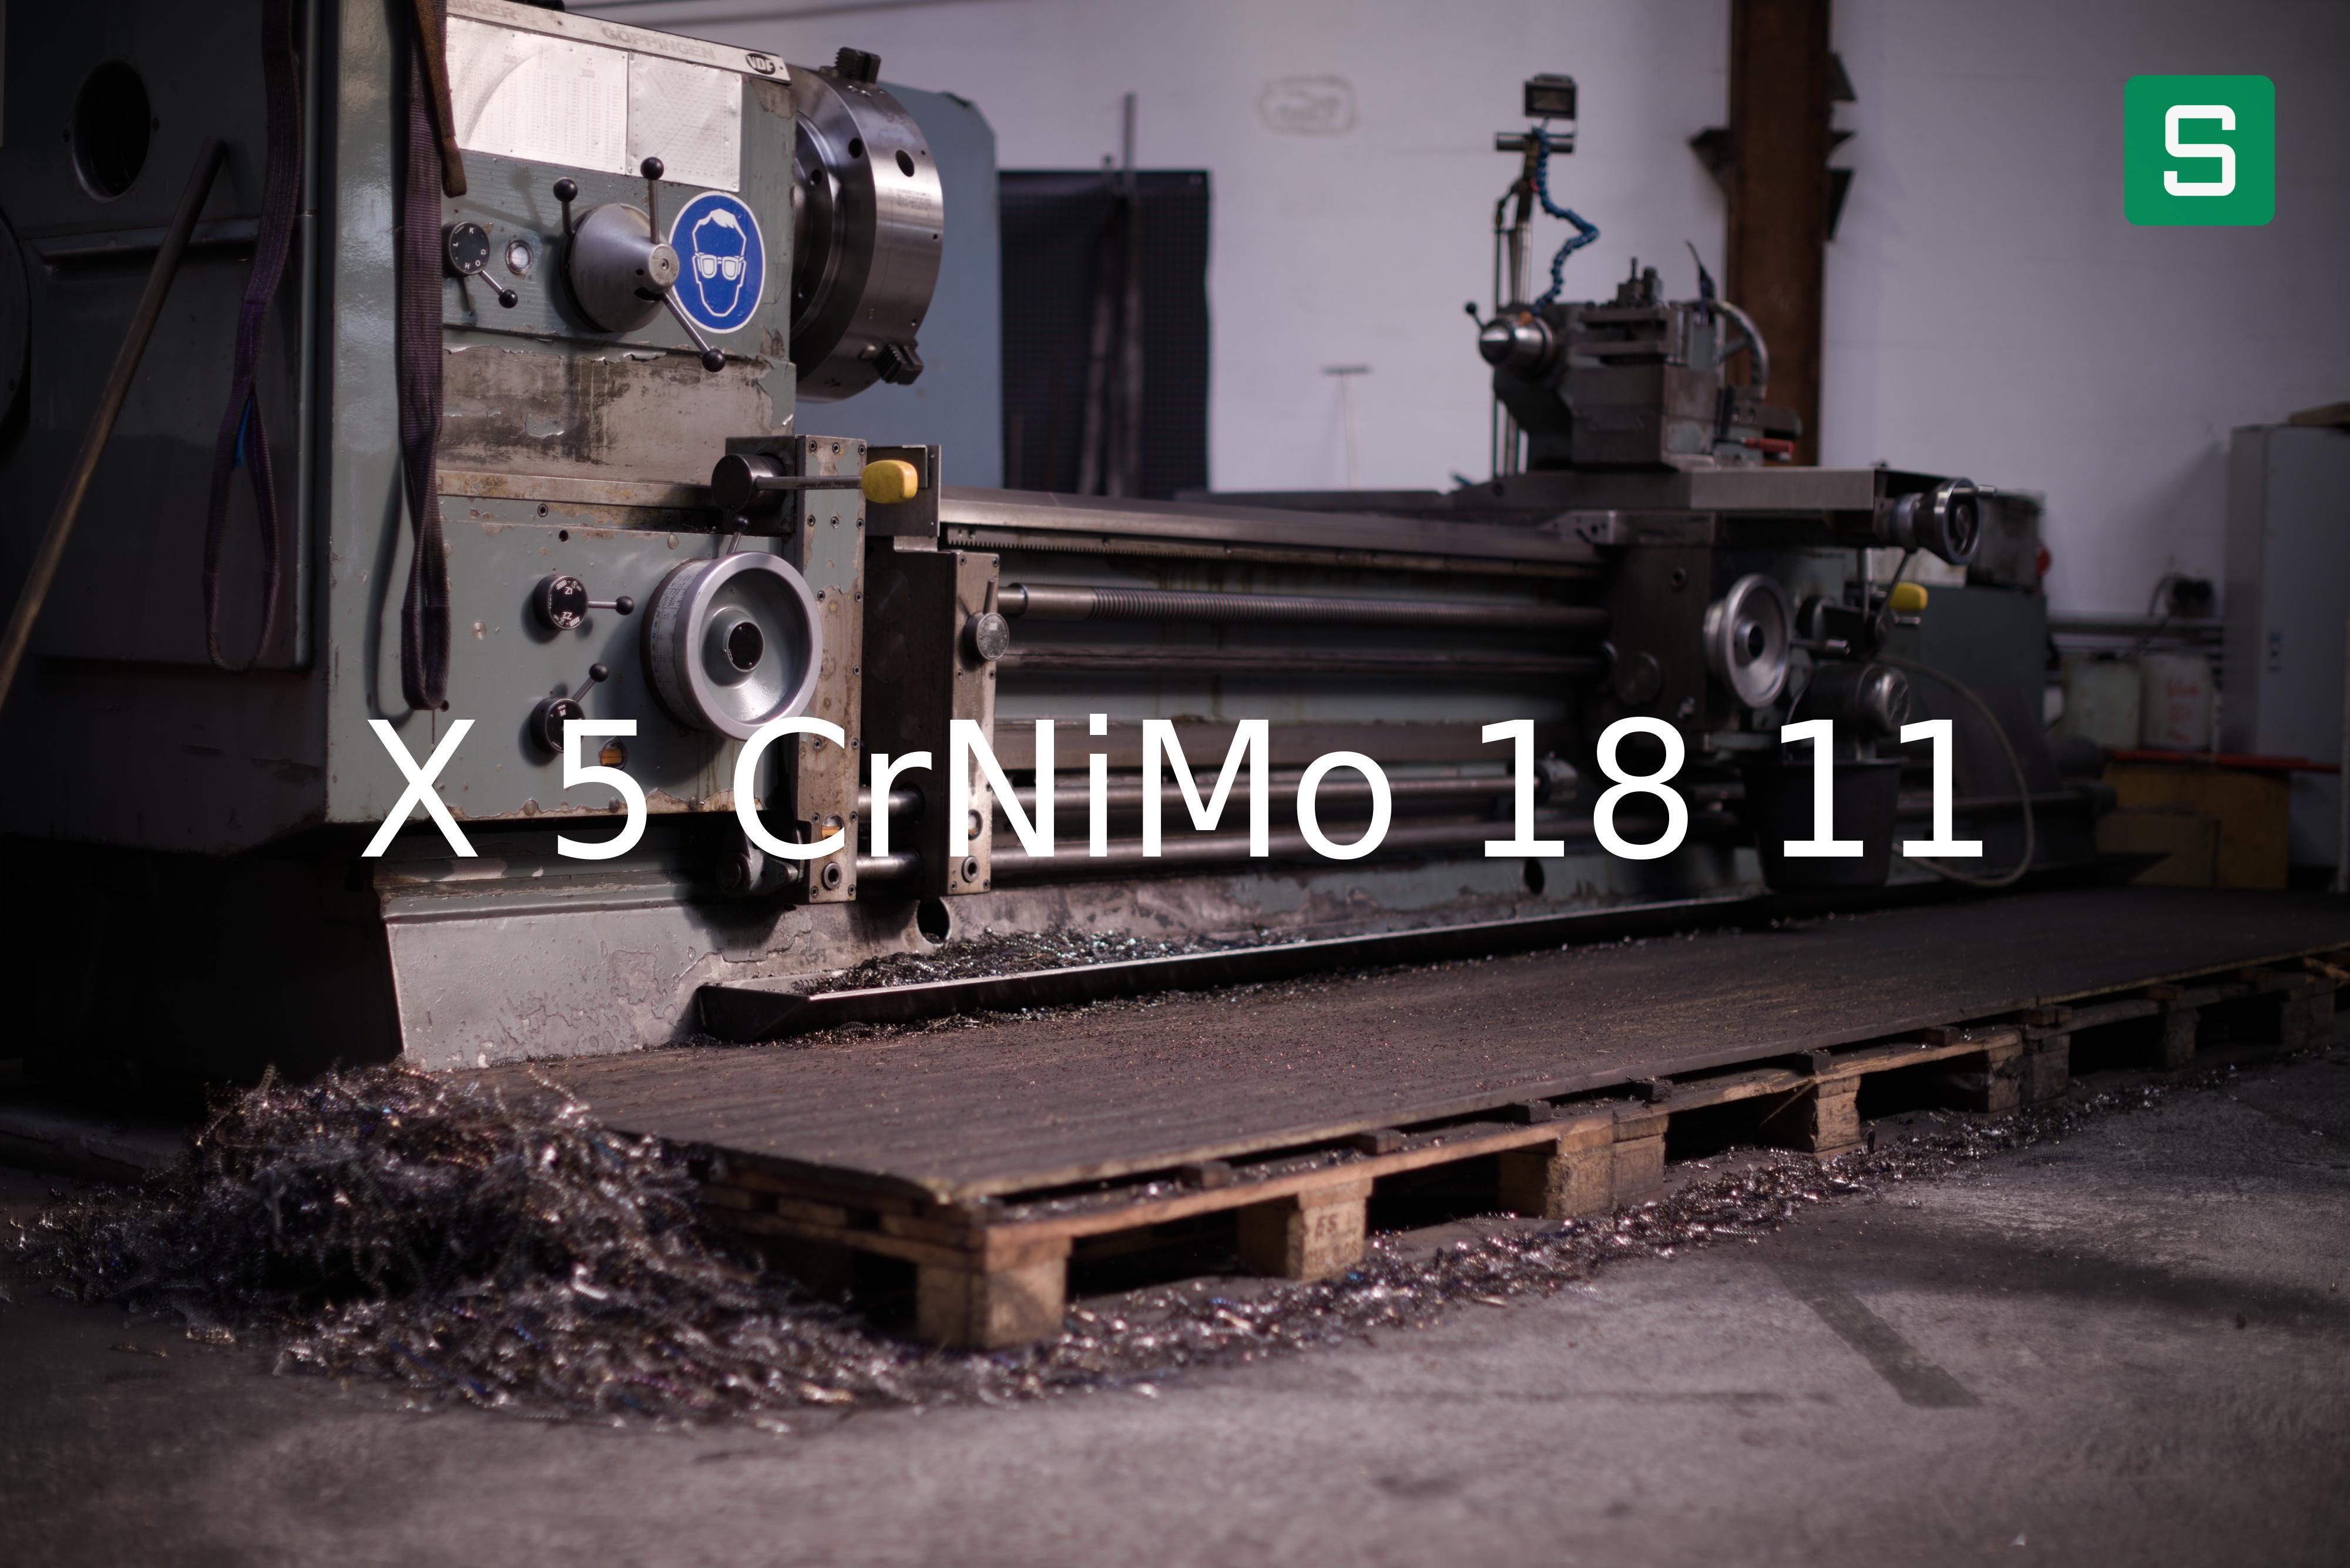 Steel Material: X 5 CrNiMo 18 11